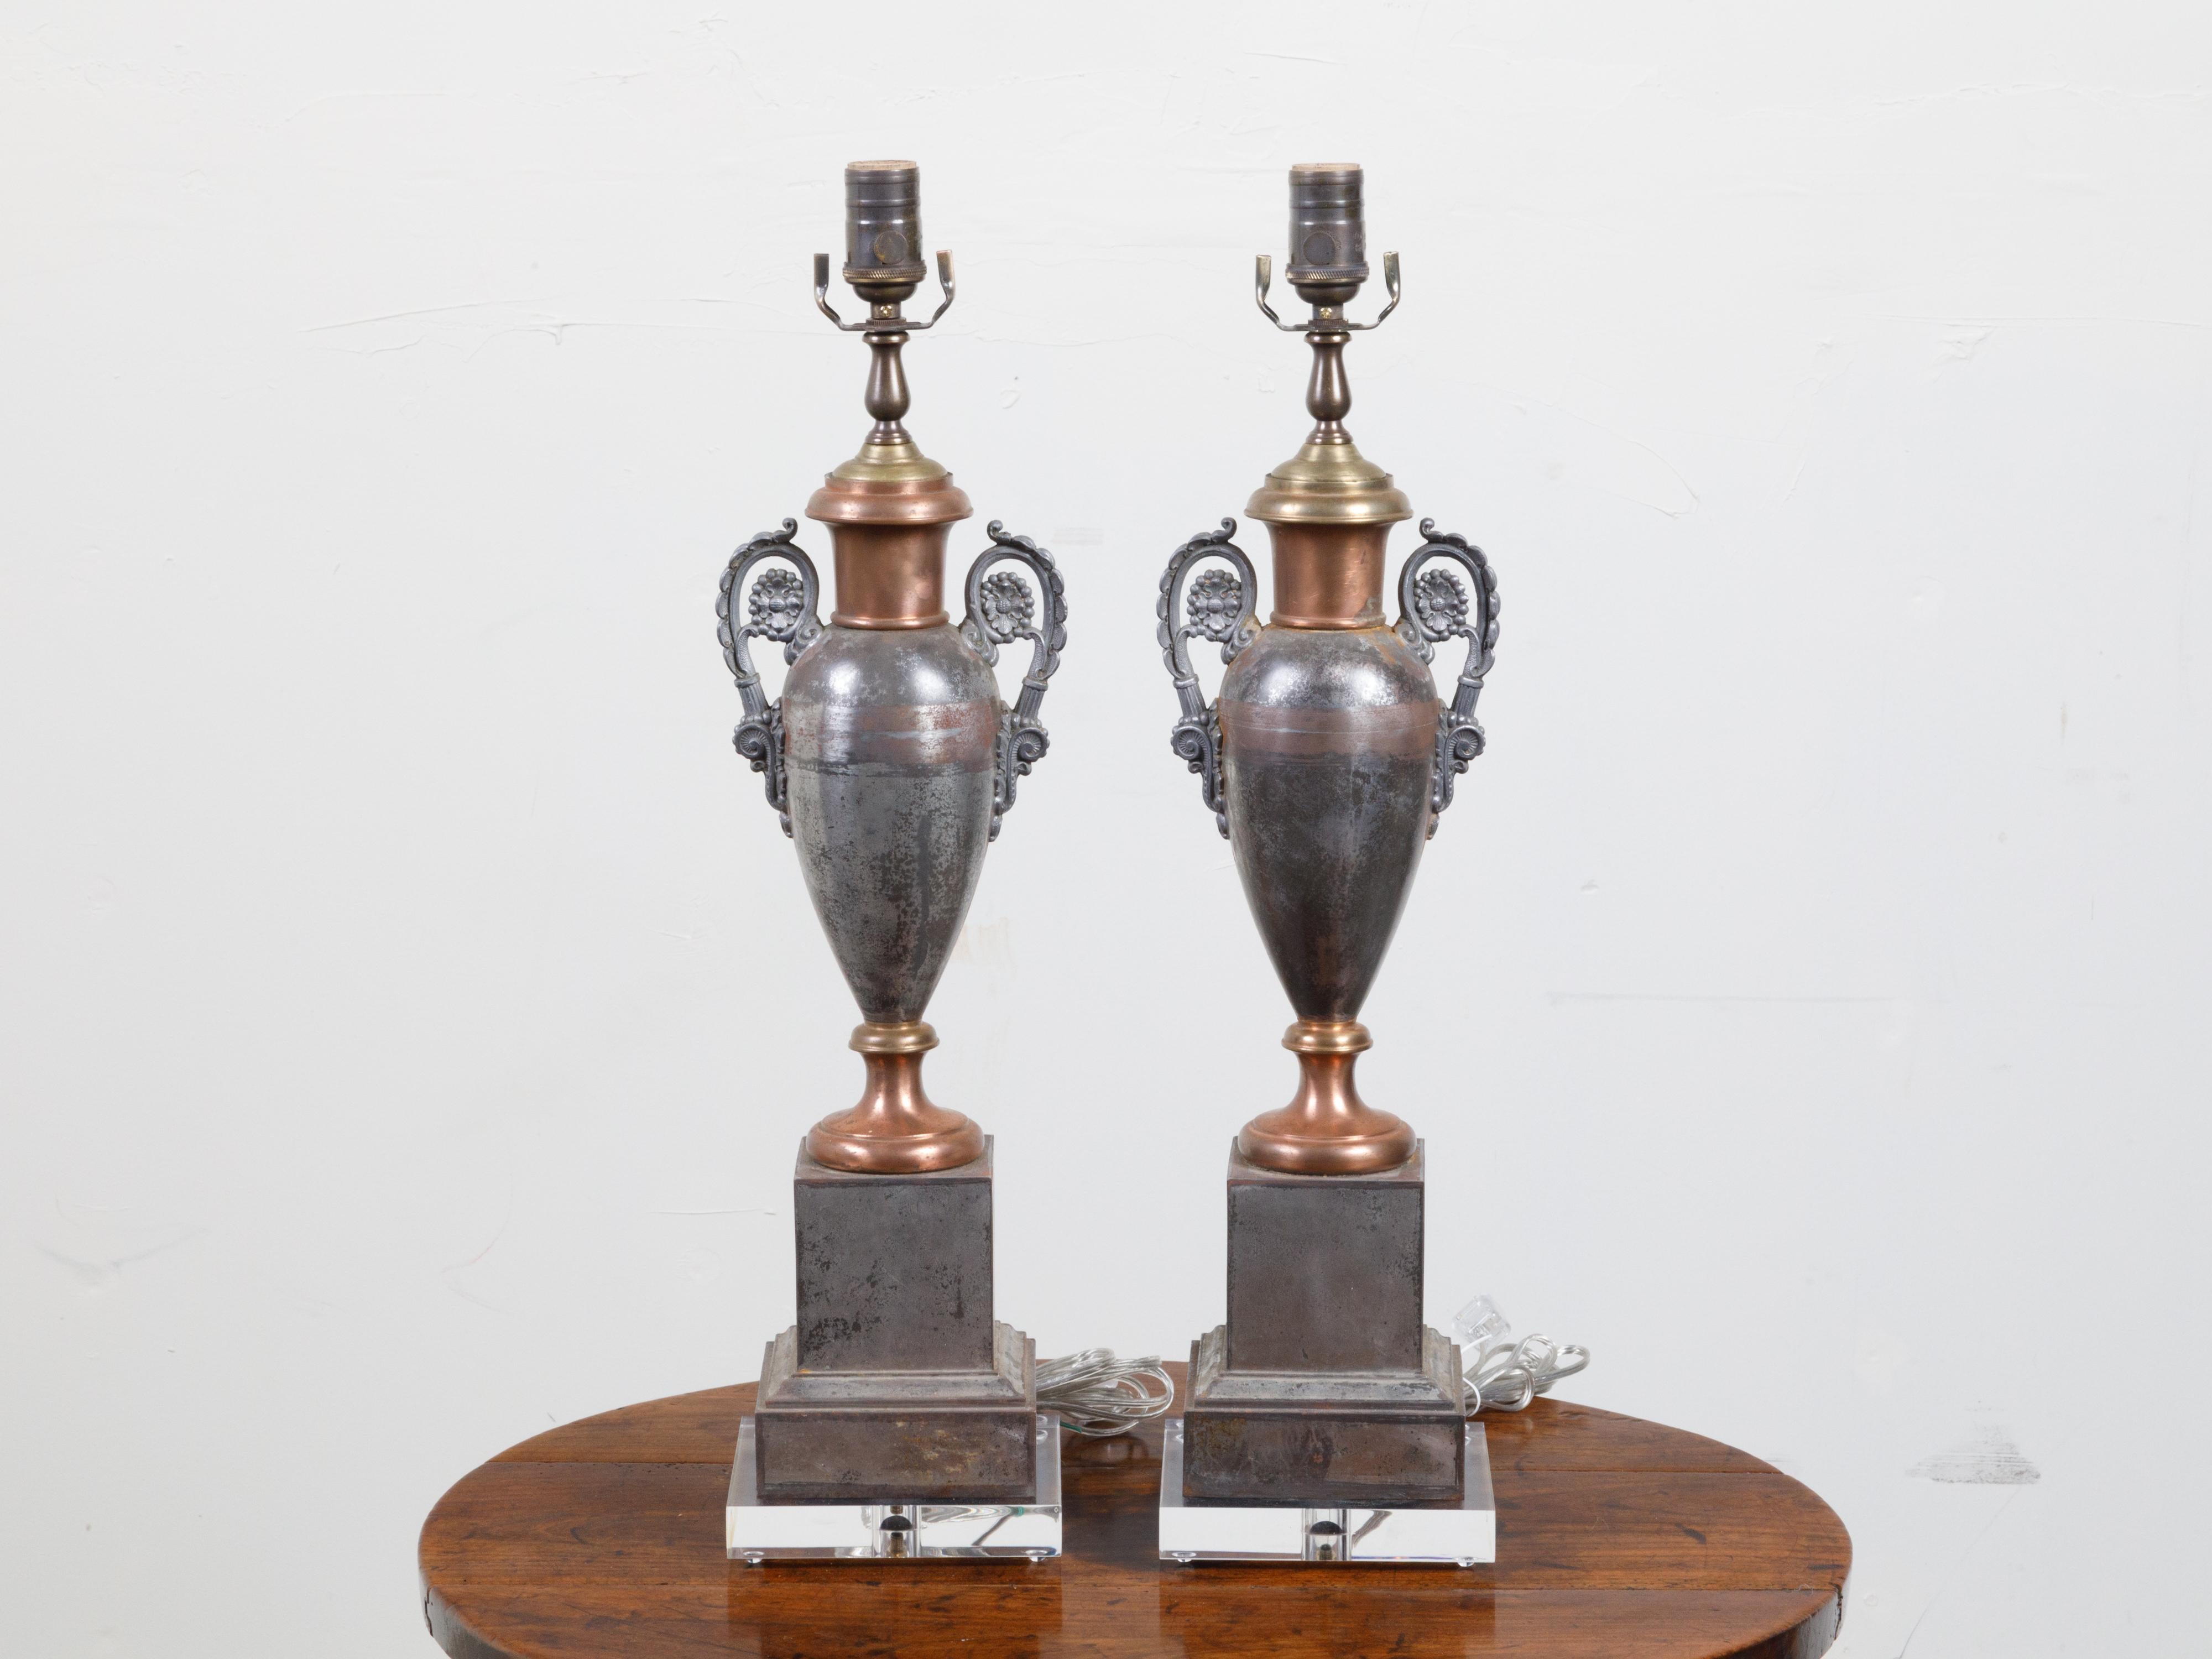 A pair of English tôle amphorae table lamps from the 19th century, with scrolling handles and lucite bases. Created in England during the 19th century, each of this pair of table lamps attracts our attention with its classical amphorae shape.